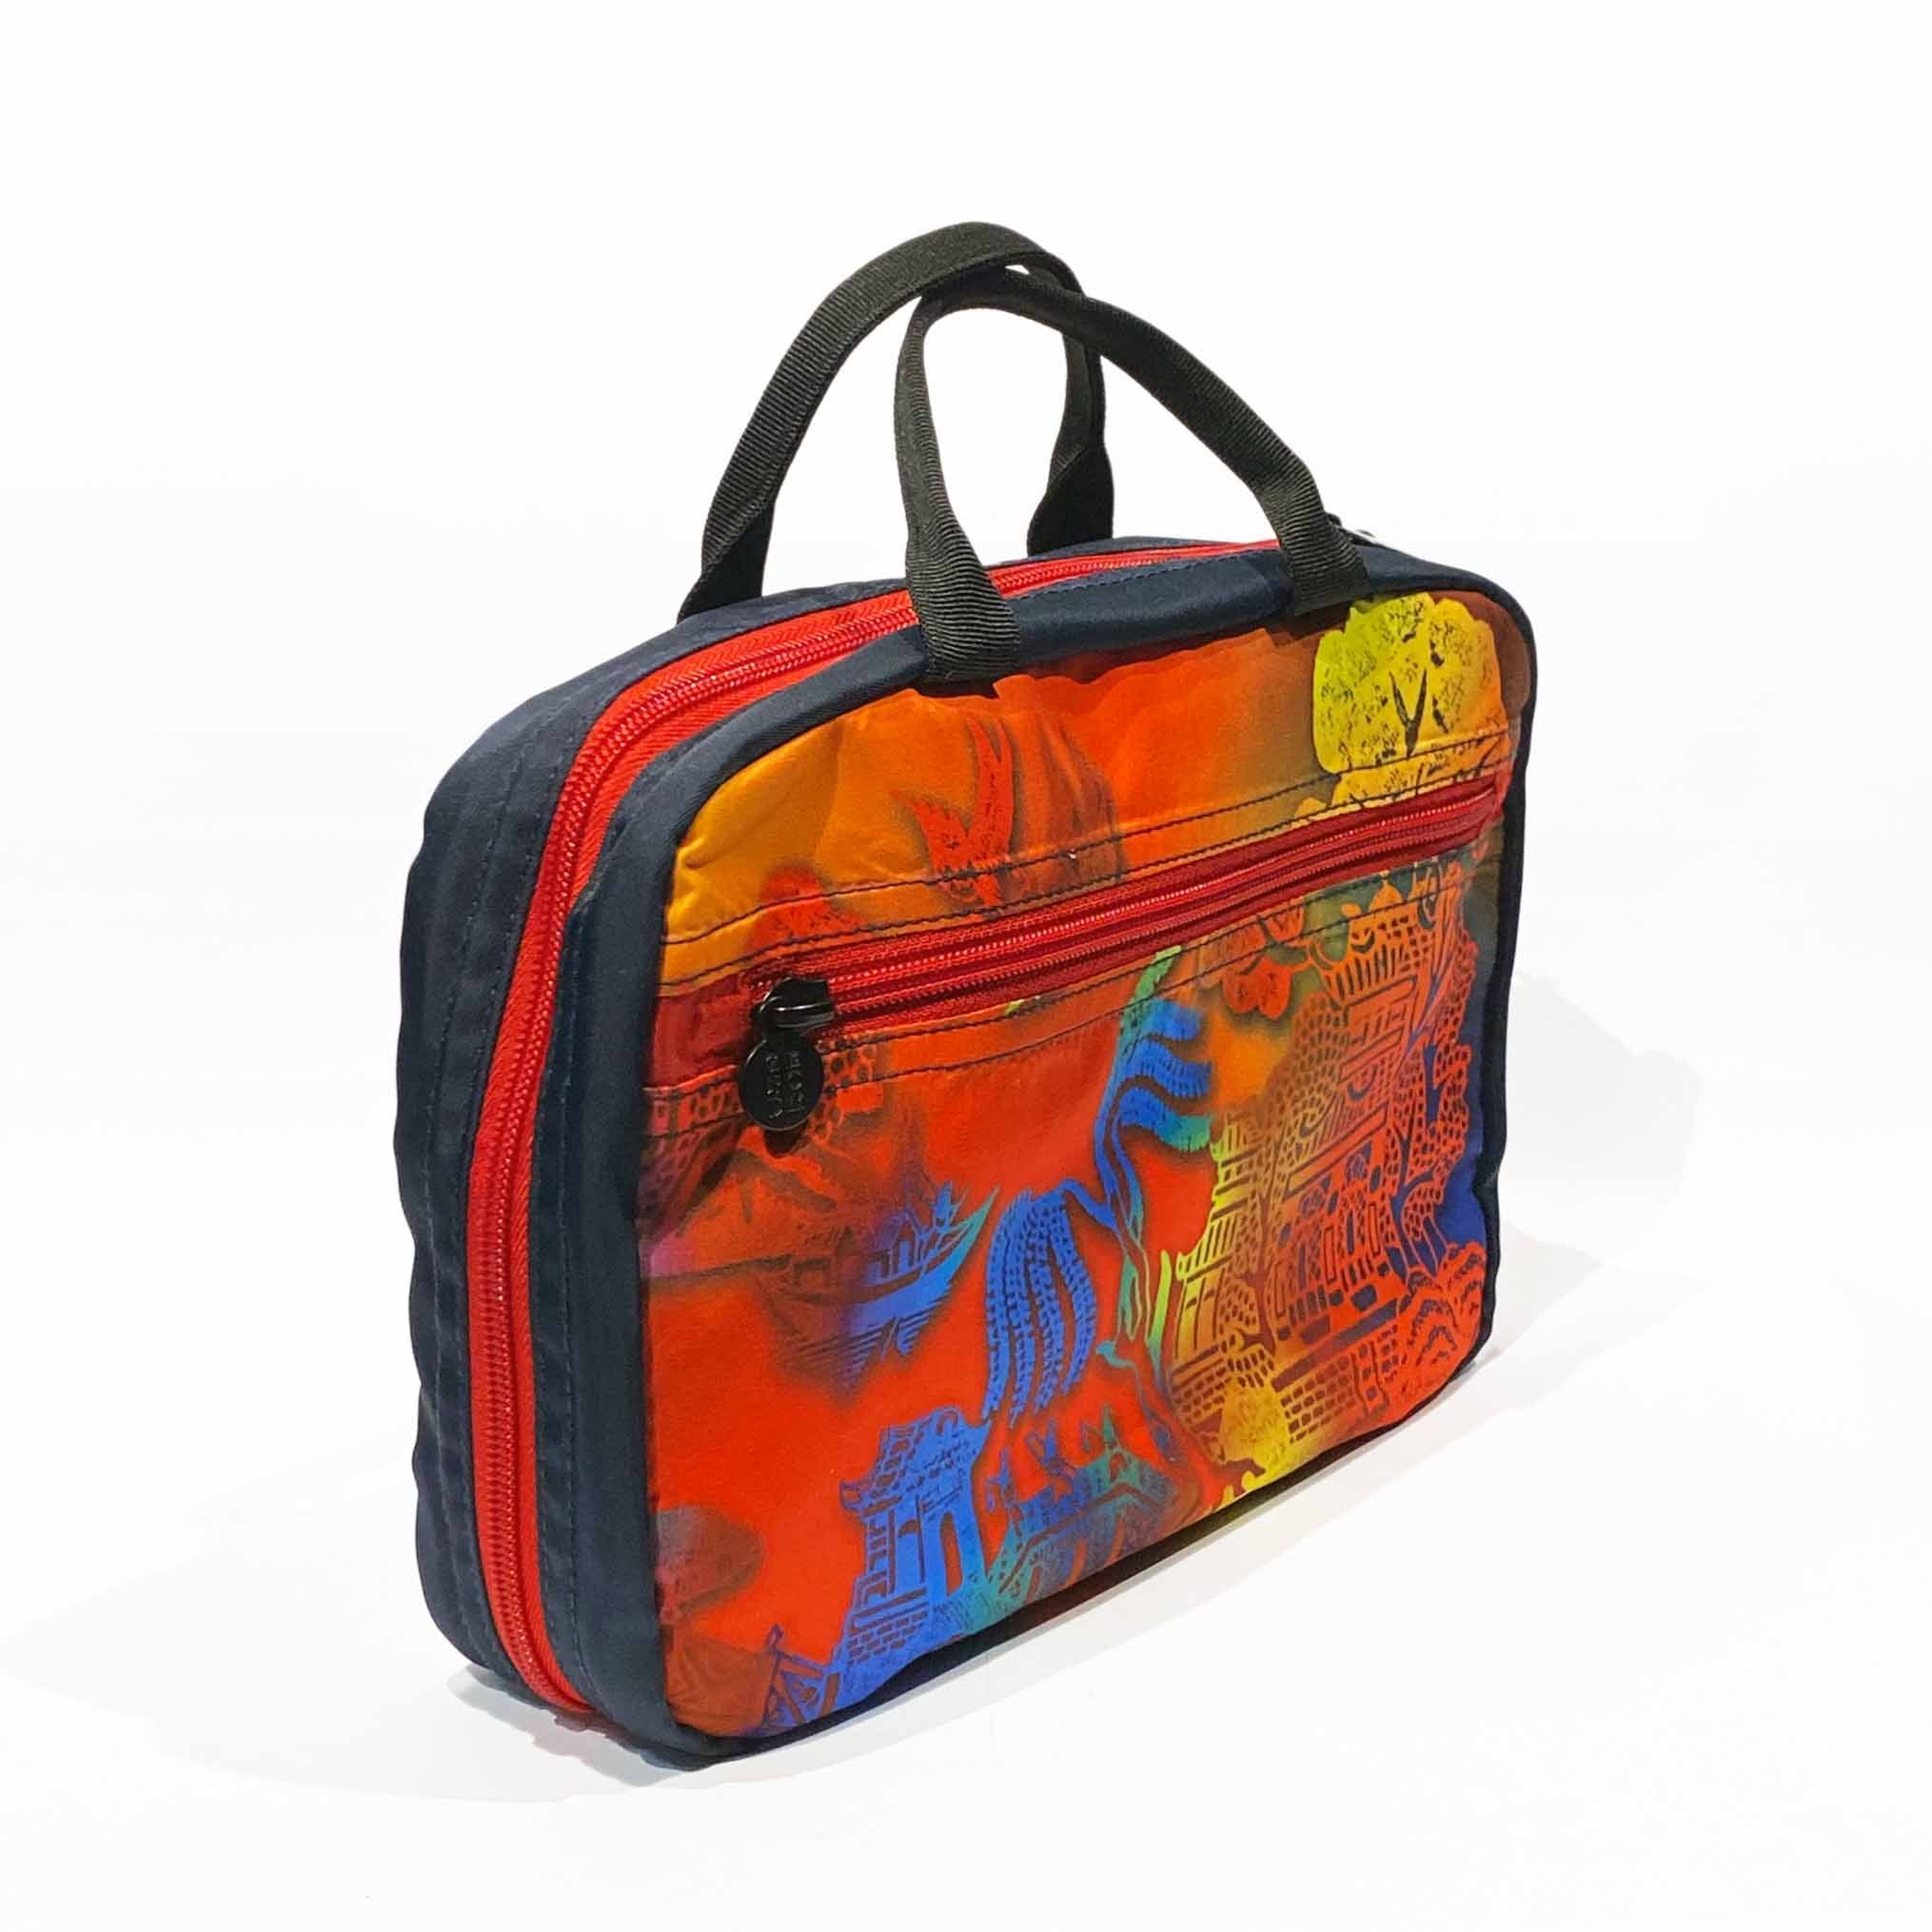 Sunset Willow Travel Toiletry Bag